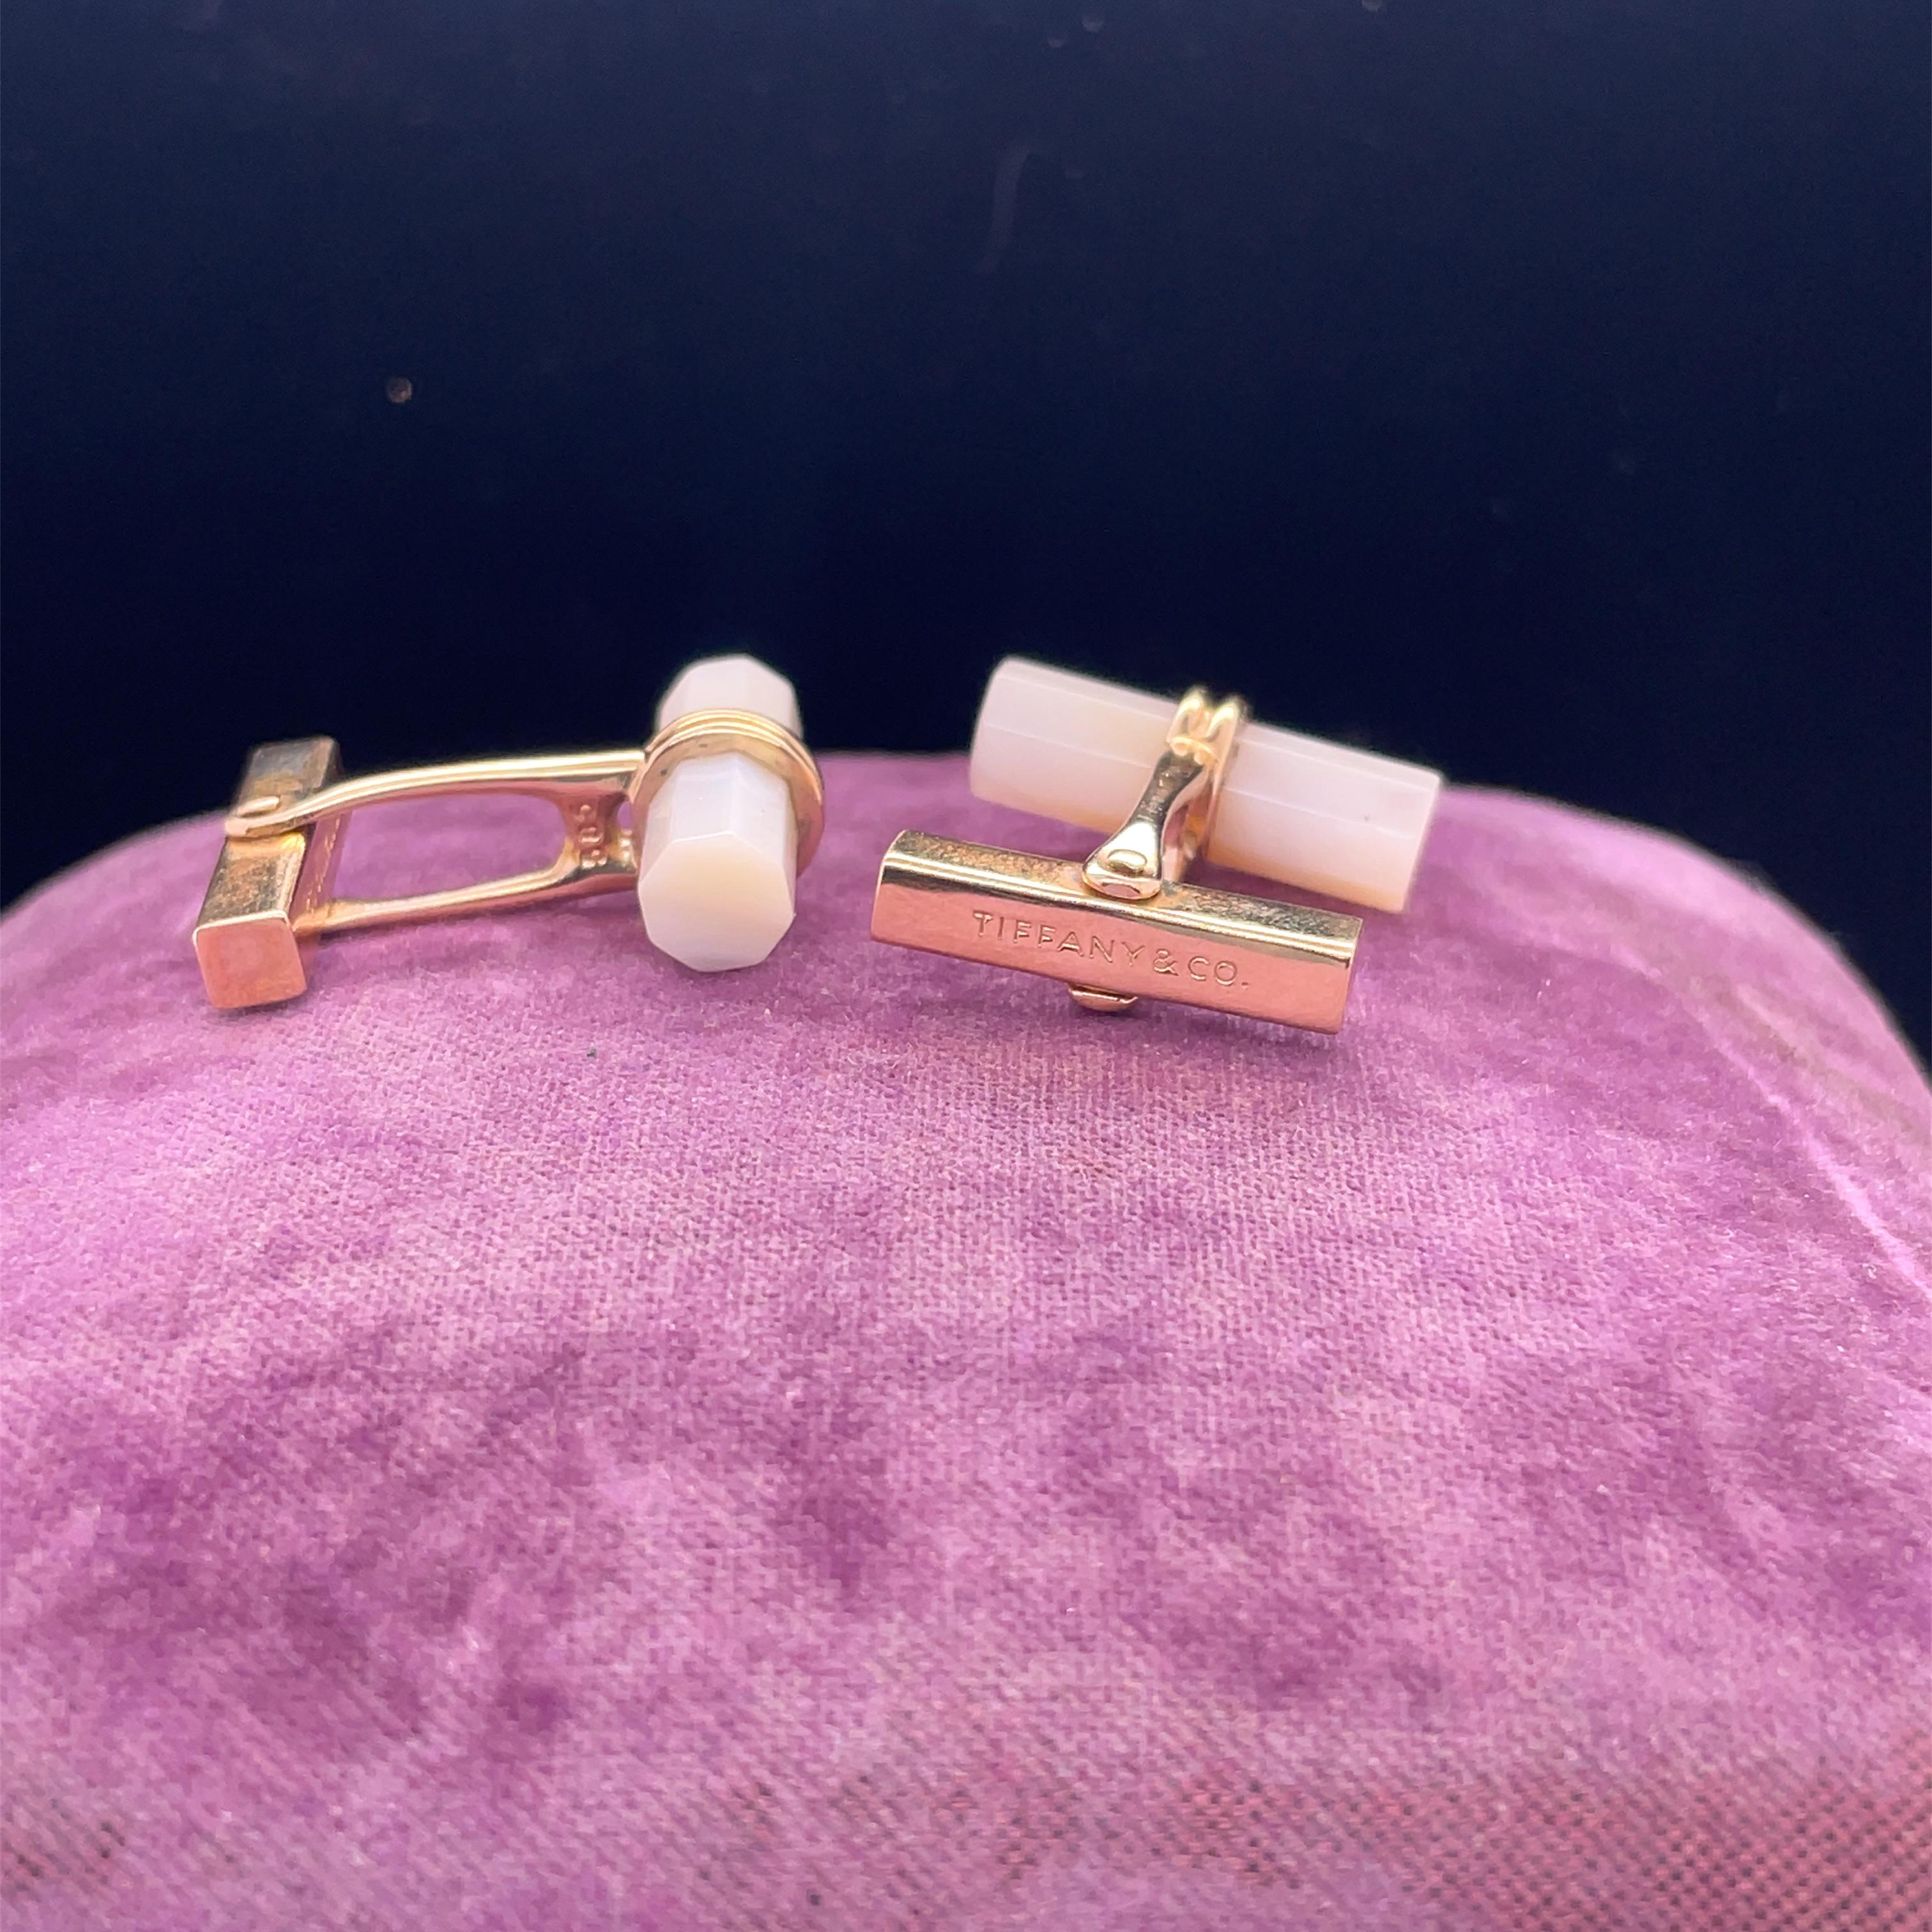 Year: 1960s
Hallmarks: Tiffany & Co

Item Details: 
Metal Type: 14K Yellow Gold [Hallmarked, and Tested]
Weight:  10.6 grams

Mother of Pearl Details:
Weight: 3.00ct, total weight approximately
Cut: Cylinder Shape
Color: White/Pink opaque

Cufflinks